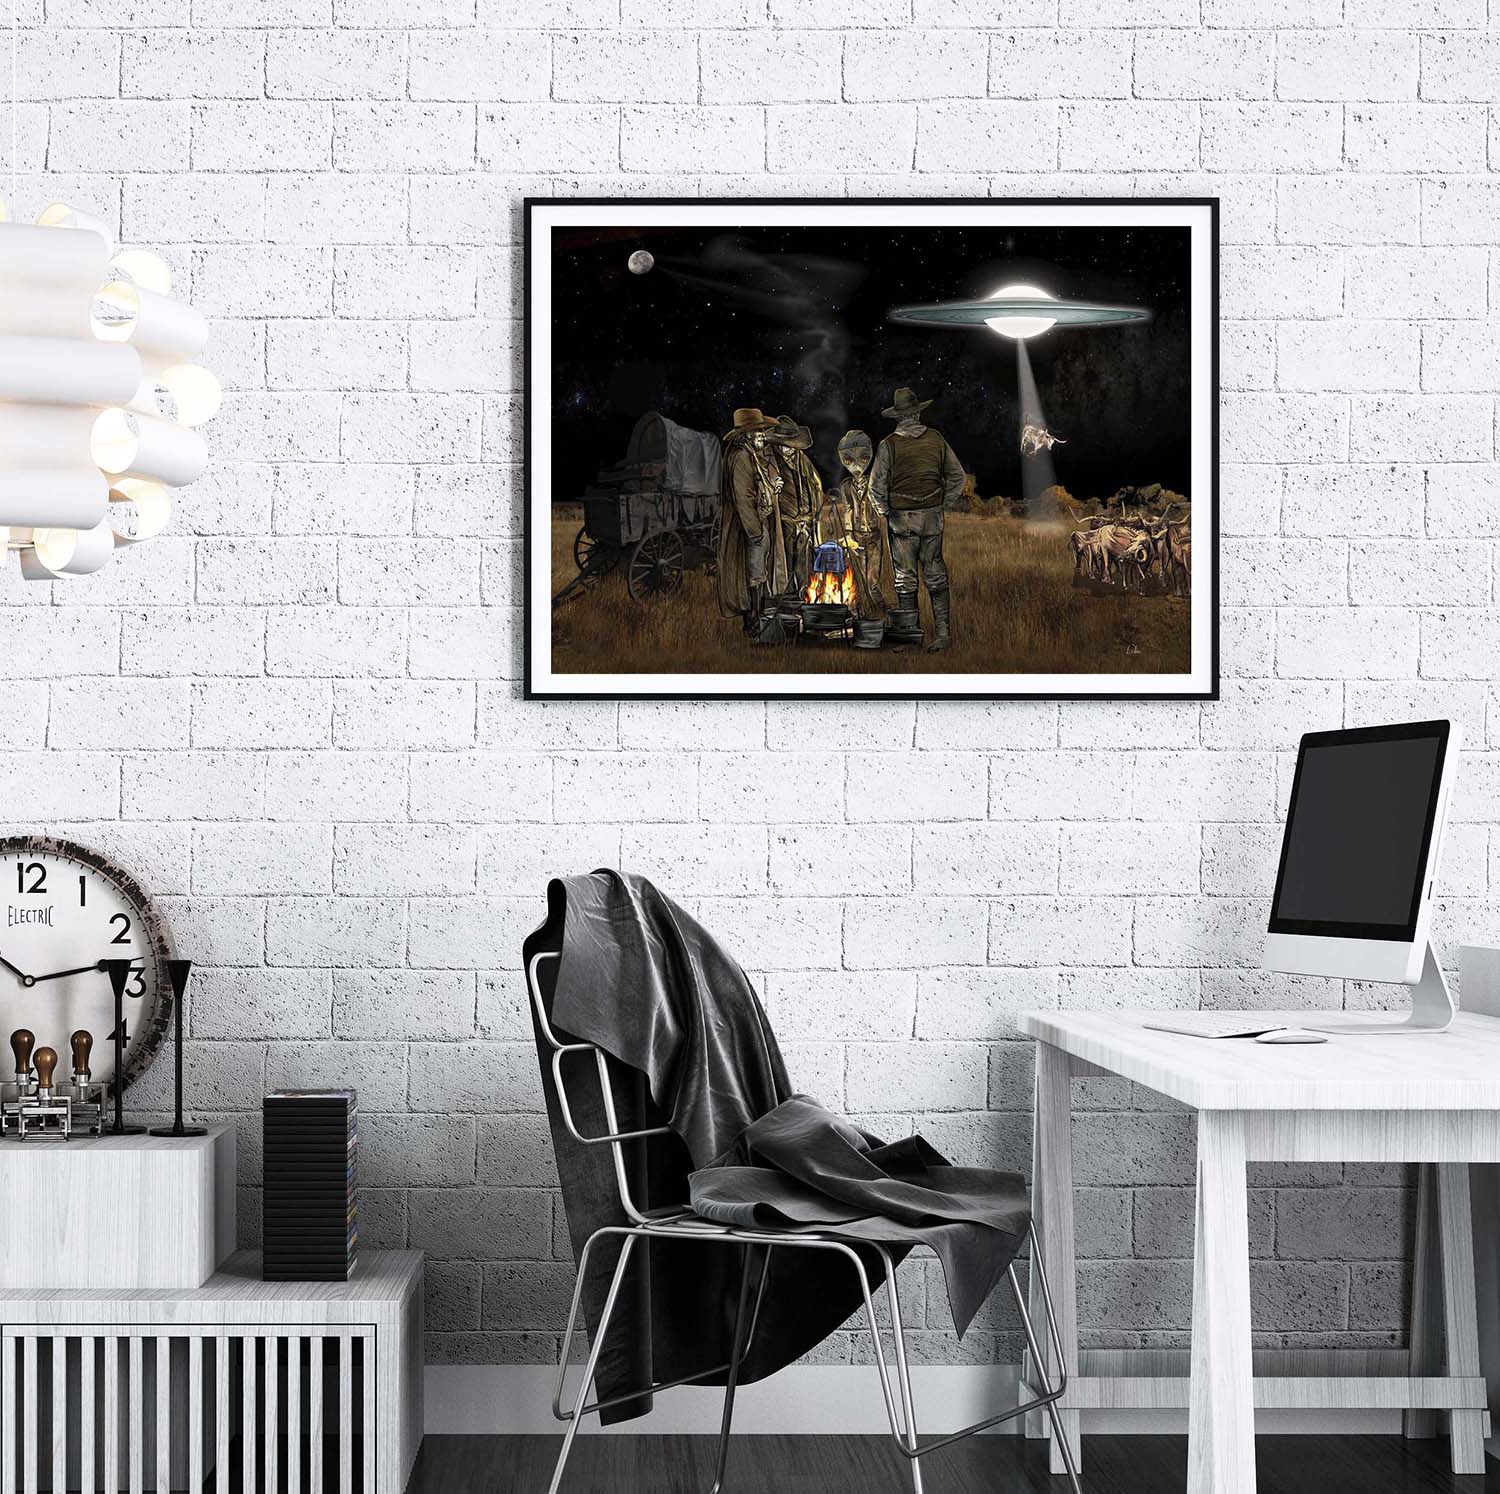 Space Cowboys mixed media art of a being from outer space negotiating the price of Longhorn beef framed print on a white brick wall in an office